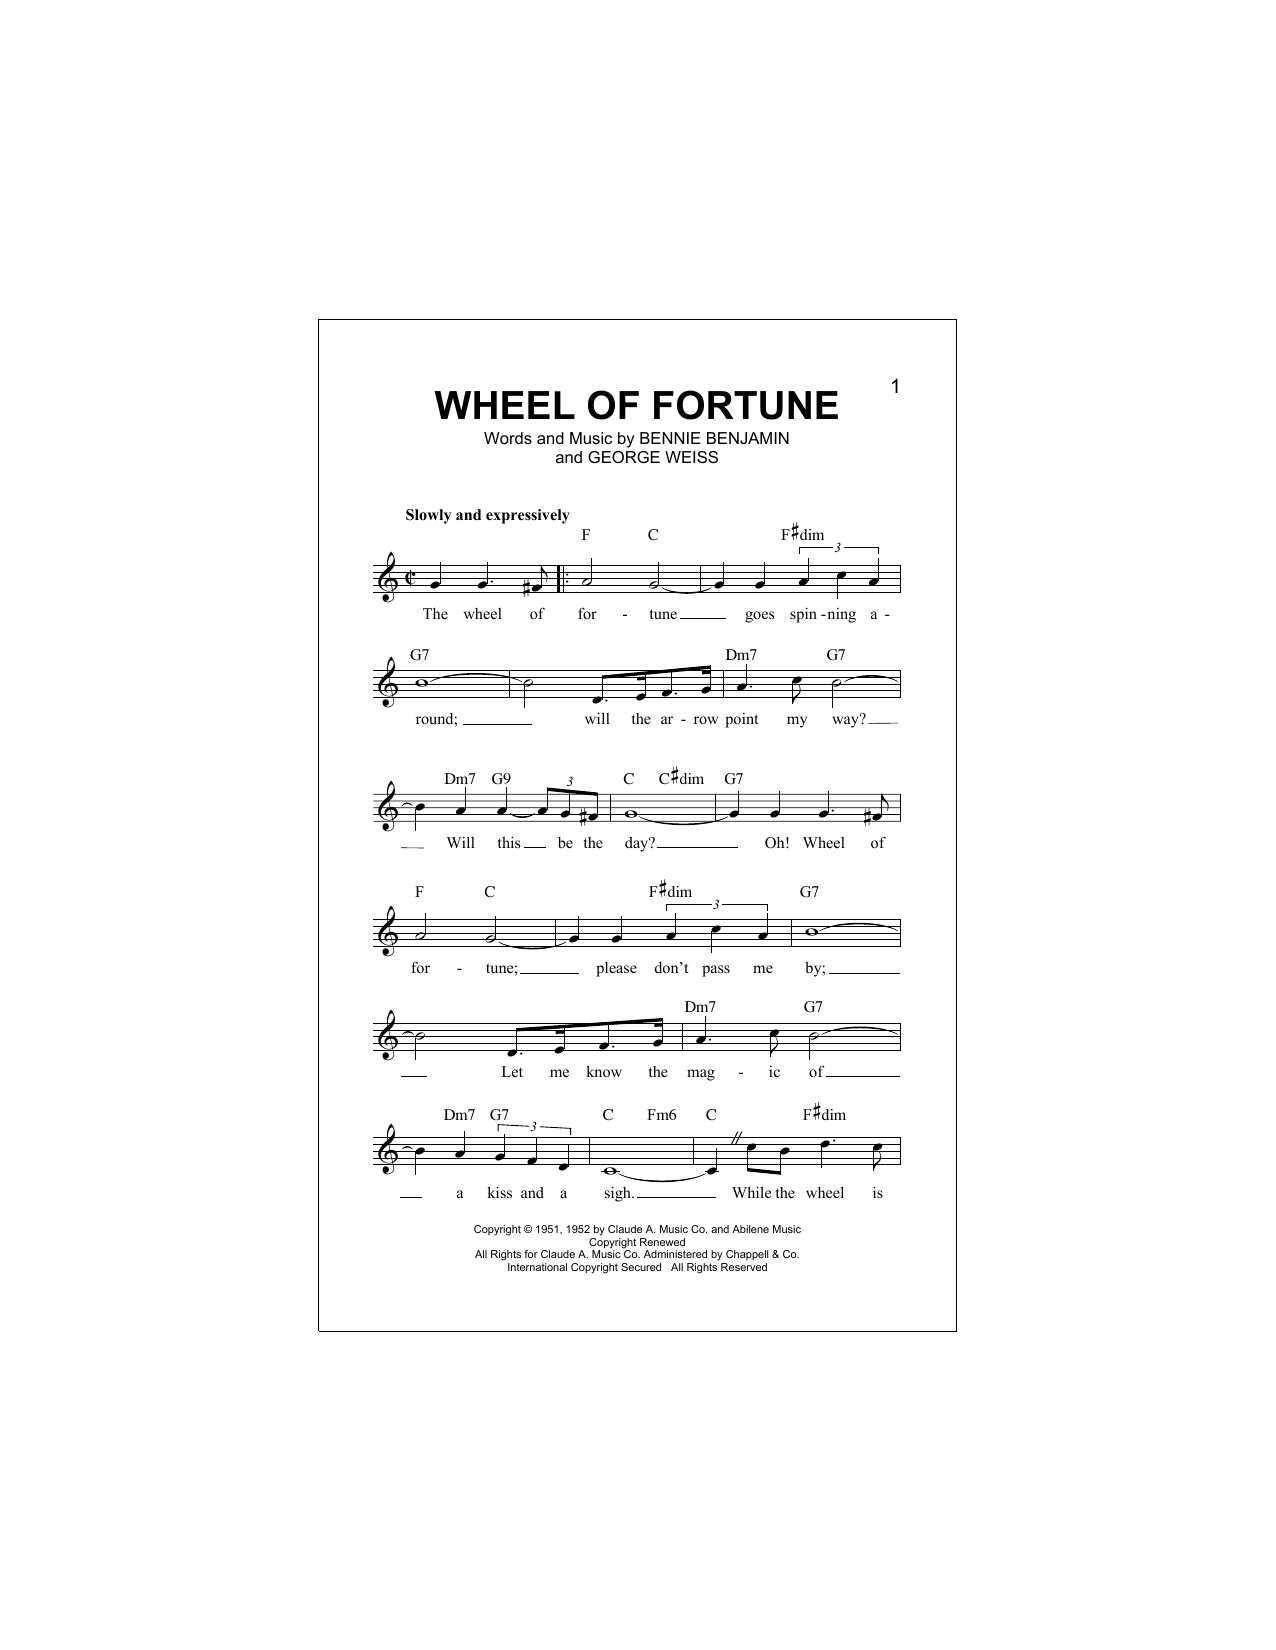 Download Kay Starr Wheel Of Fortune Sheet Music